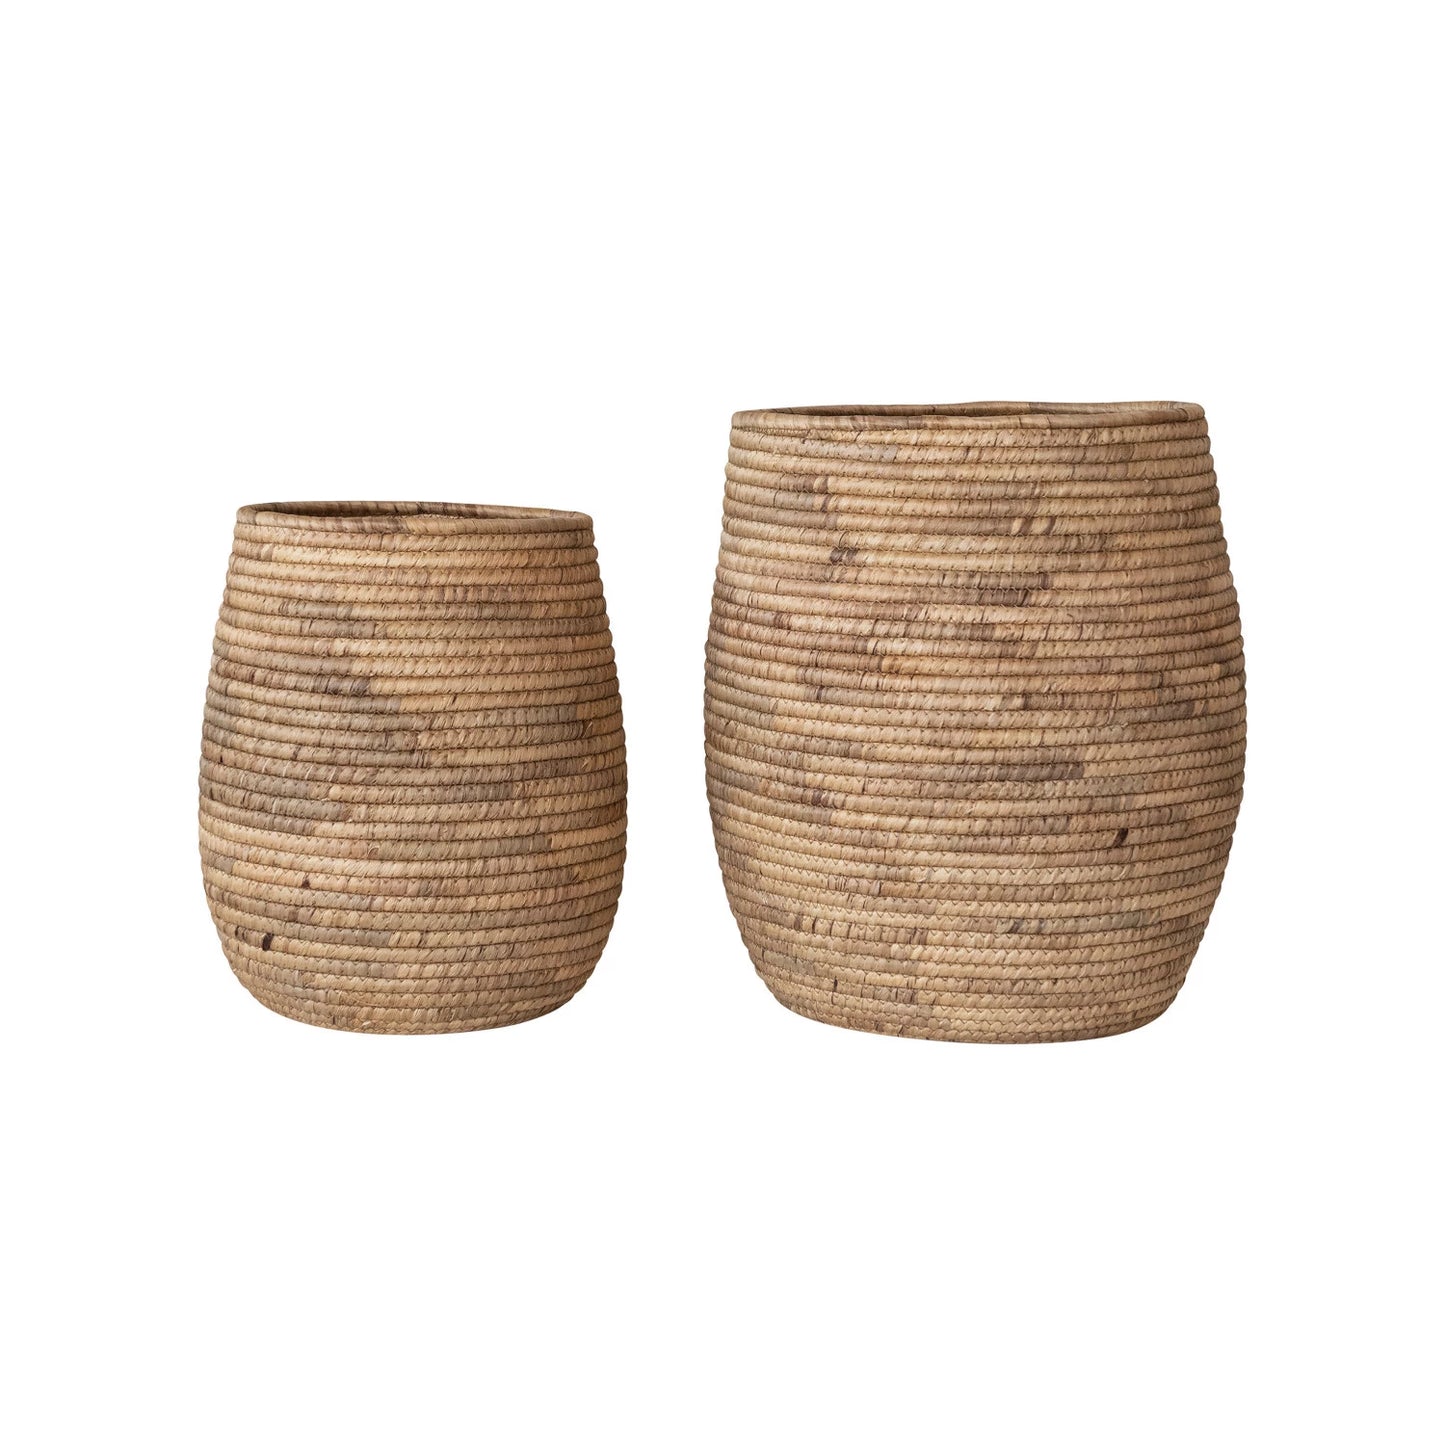 Hand Woven Water Hyacinth Baskets, The Feathered Farmhouse